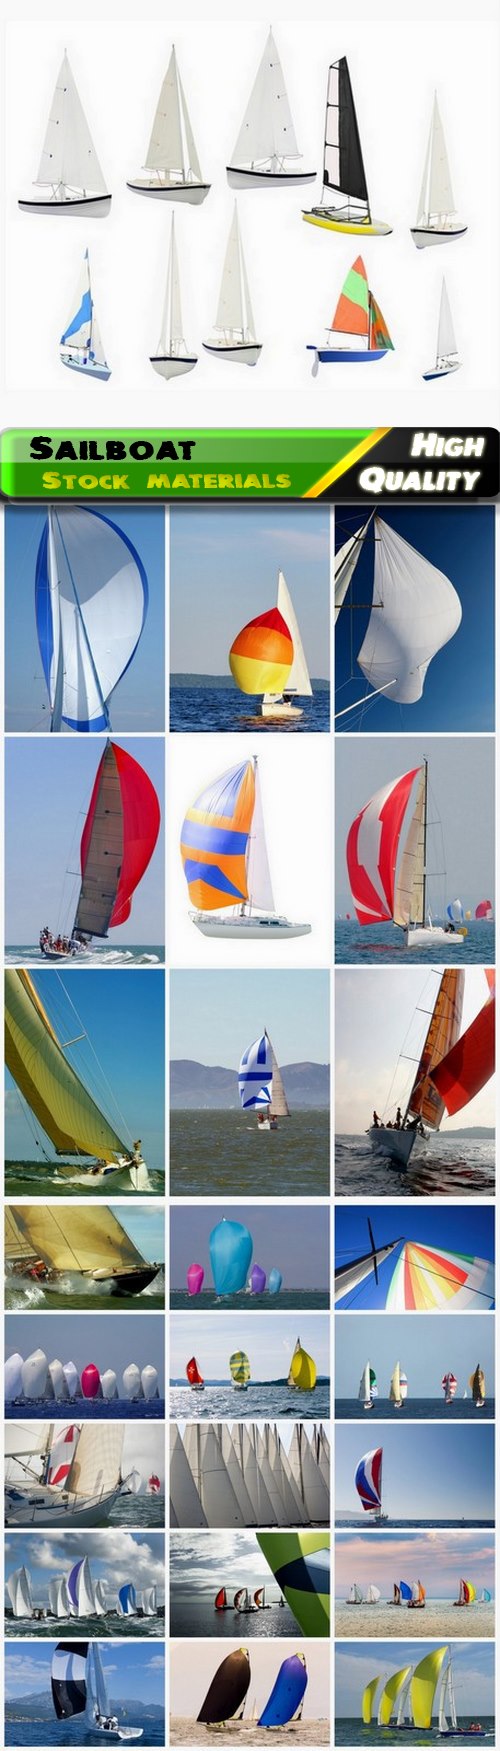 Sailboat and yacht on regatta with colored spinnaker 25 HQ Jpg